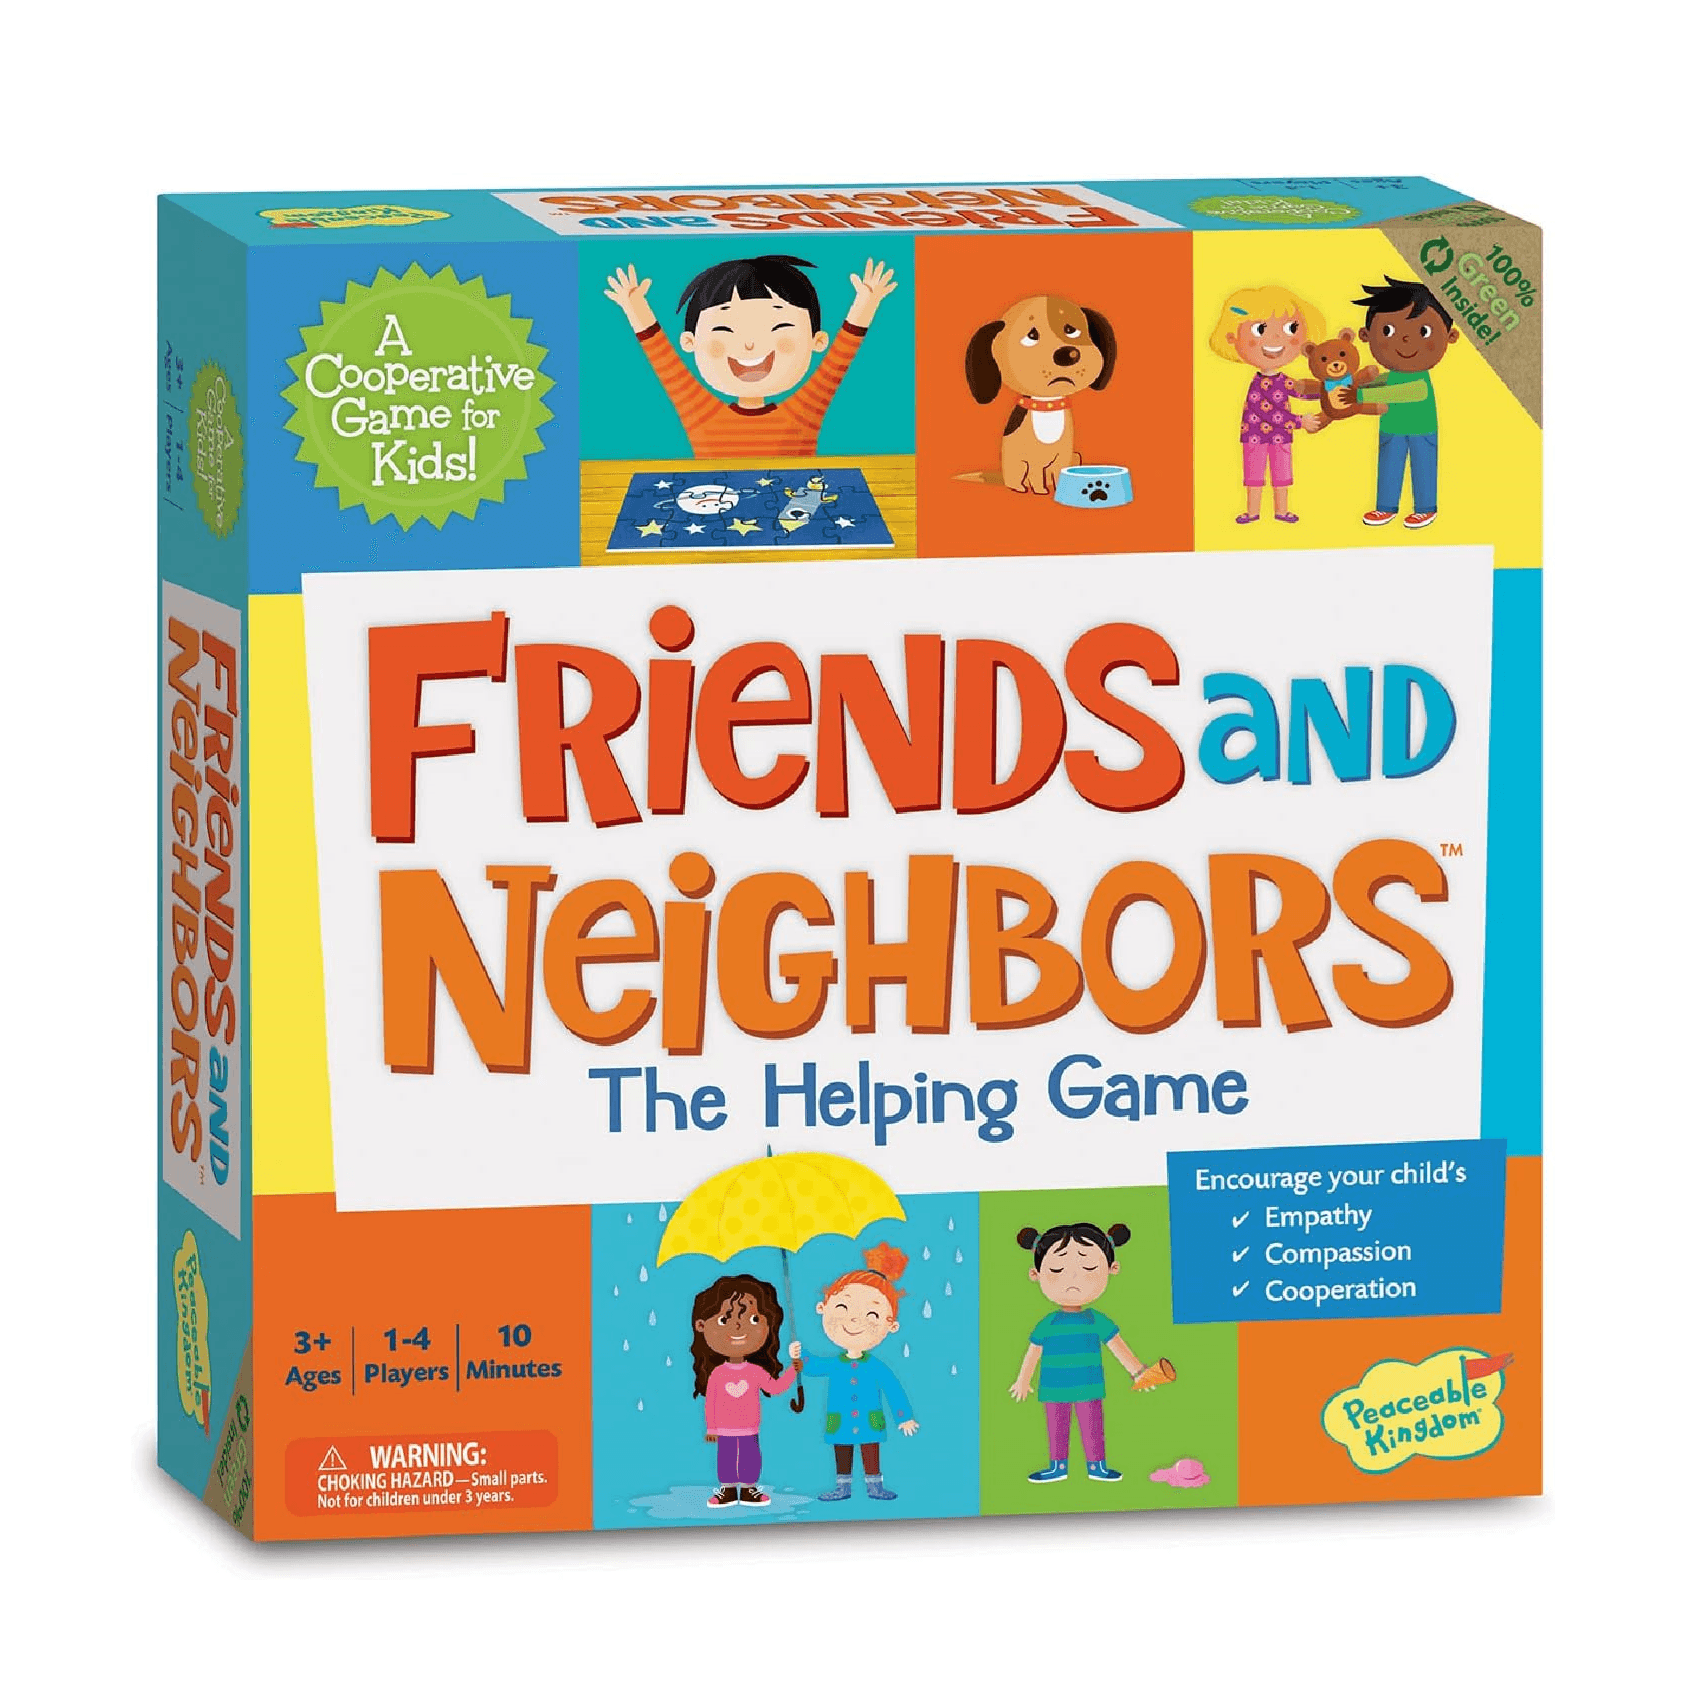 Montessori Peaceable Kingdom Friends and Neighbors: The Helping Game